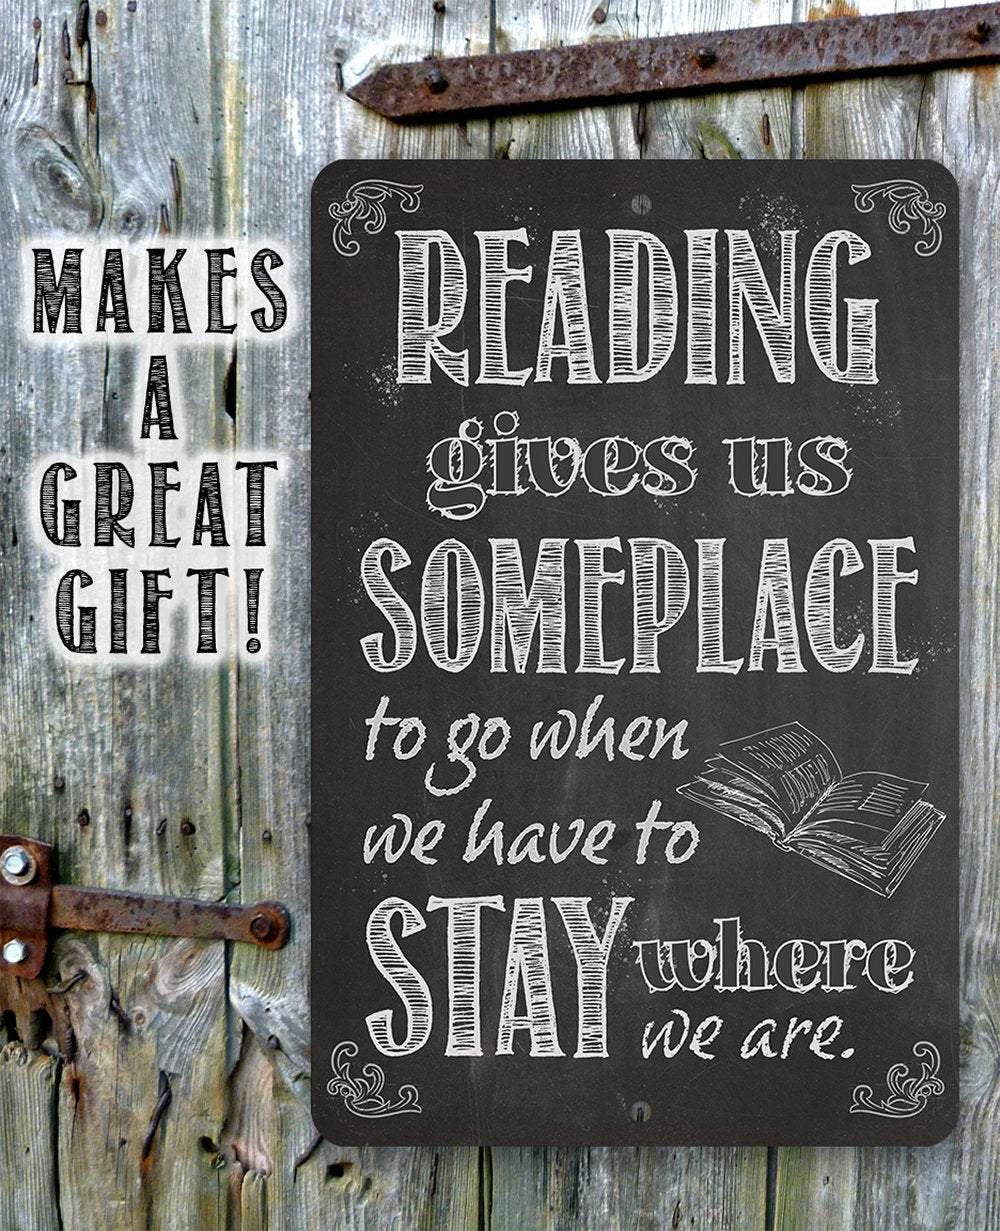 Reading Gives Us - Metal Sign | Lone Star Art.